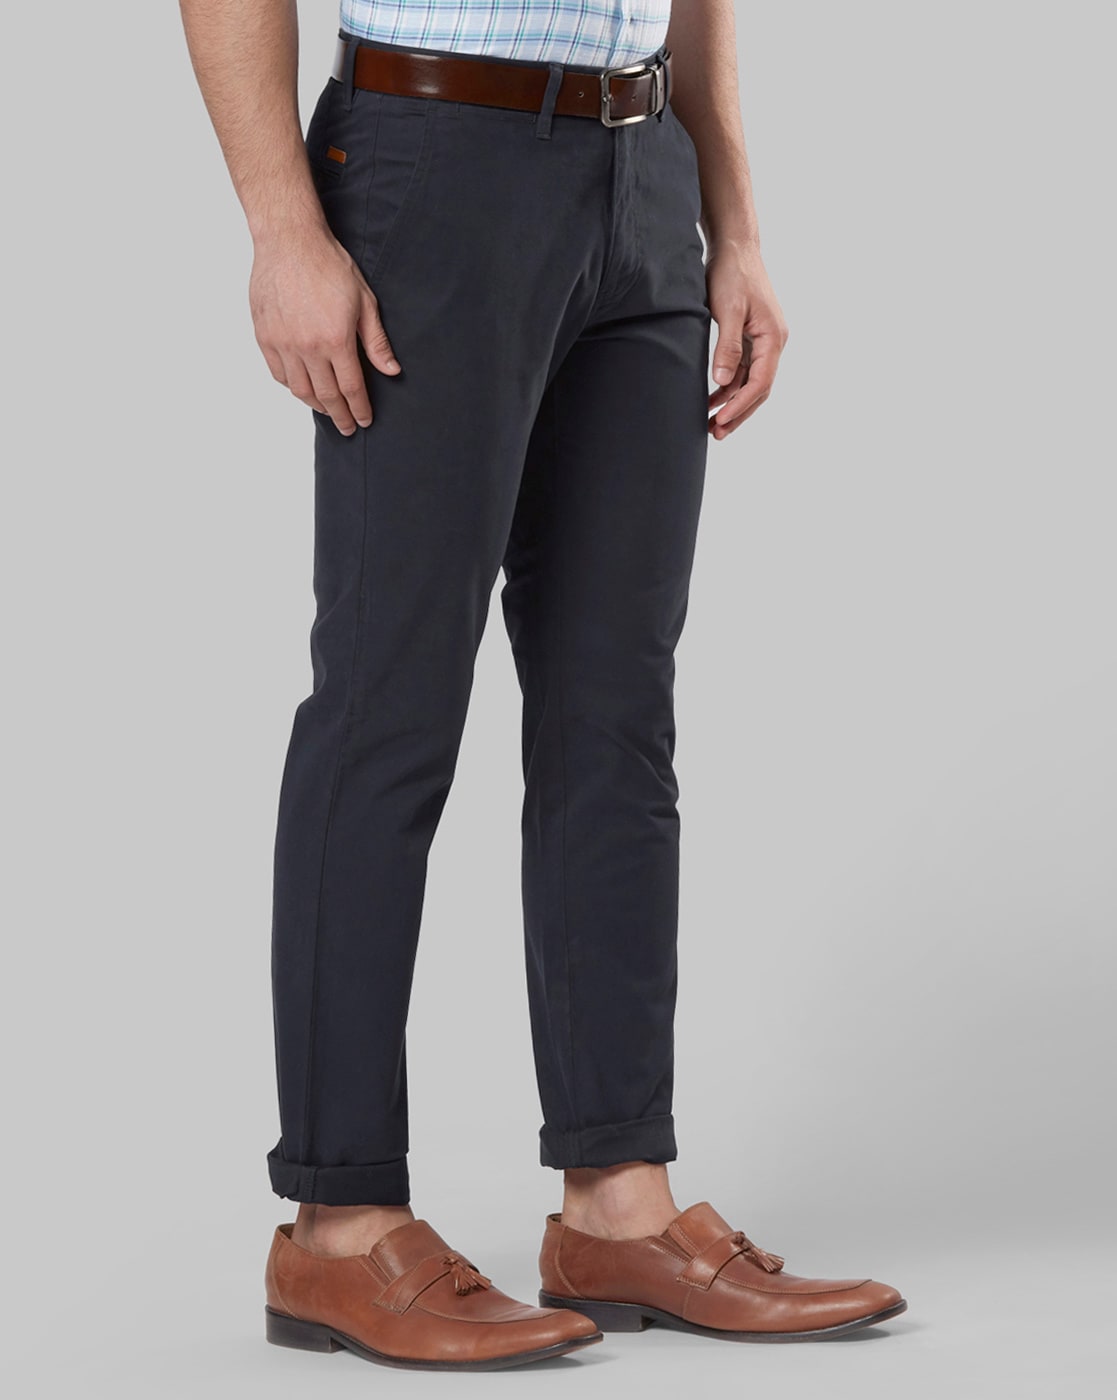 Next Look by Raymond Regular Fit Slim Fit Men Dark Blue Trousers  Buy Next  Look by Raymond Regular Fit Slim Fit Men Dark Blue Trousers Online at Best  Prices in India 